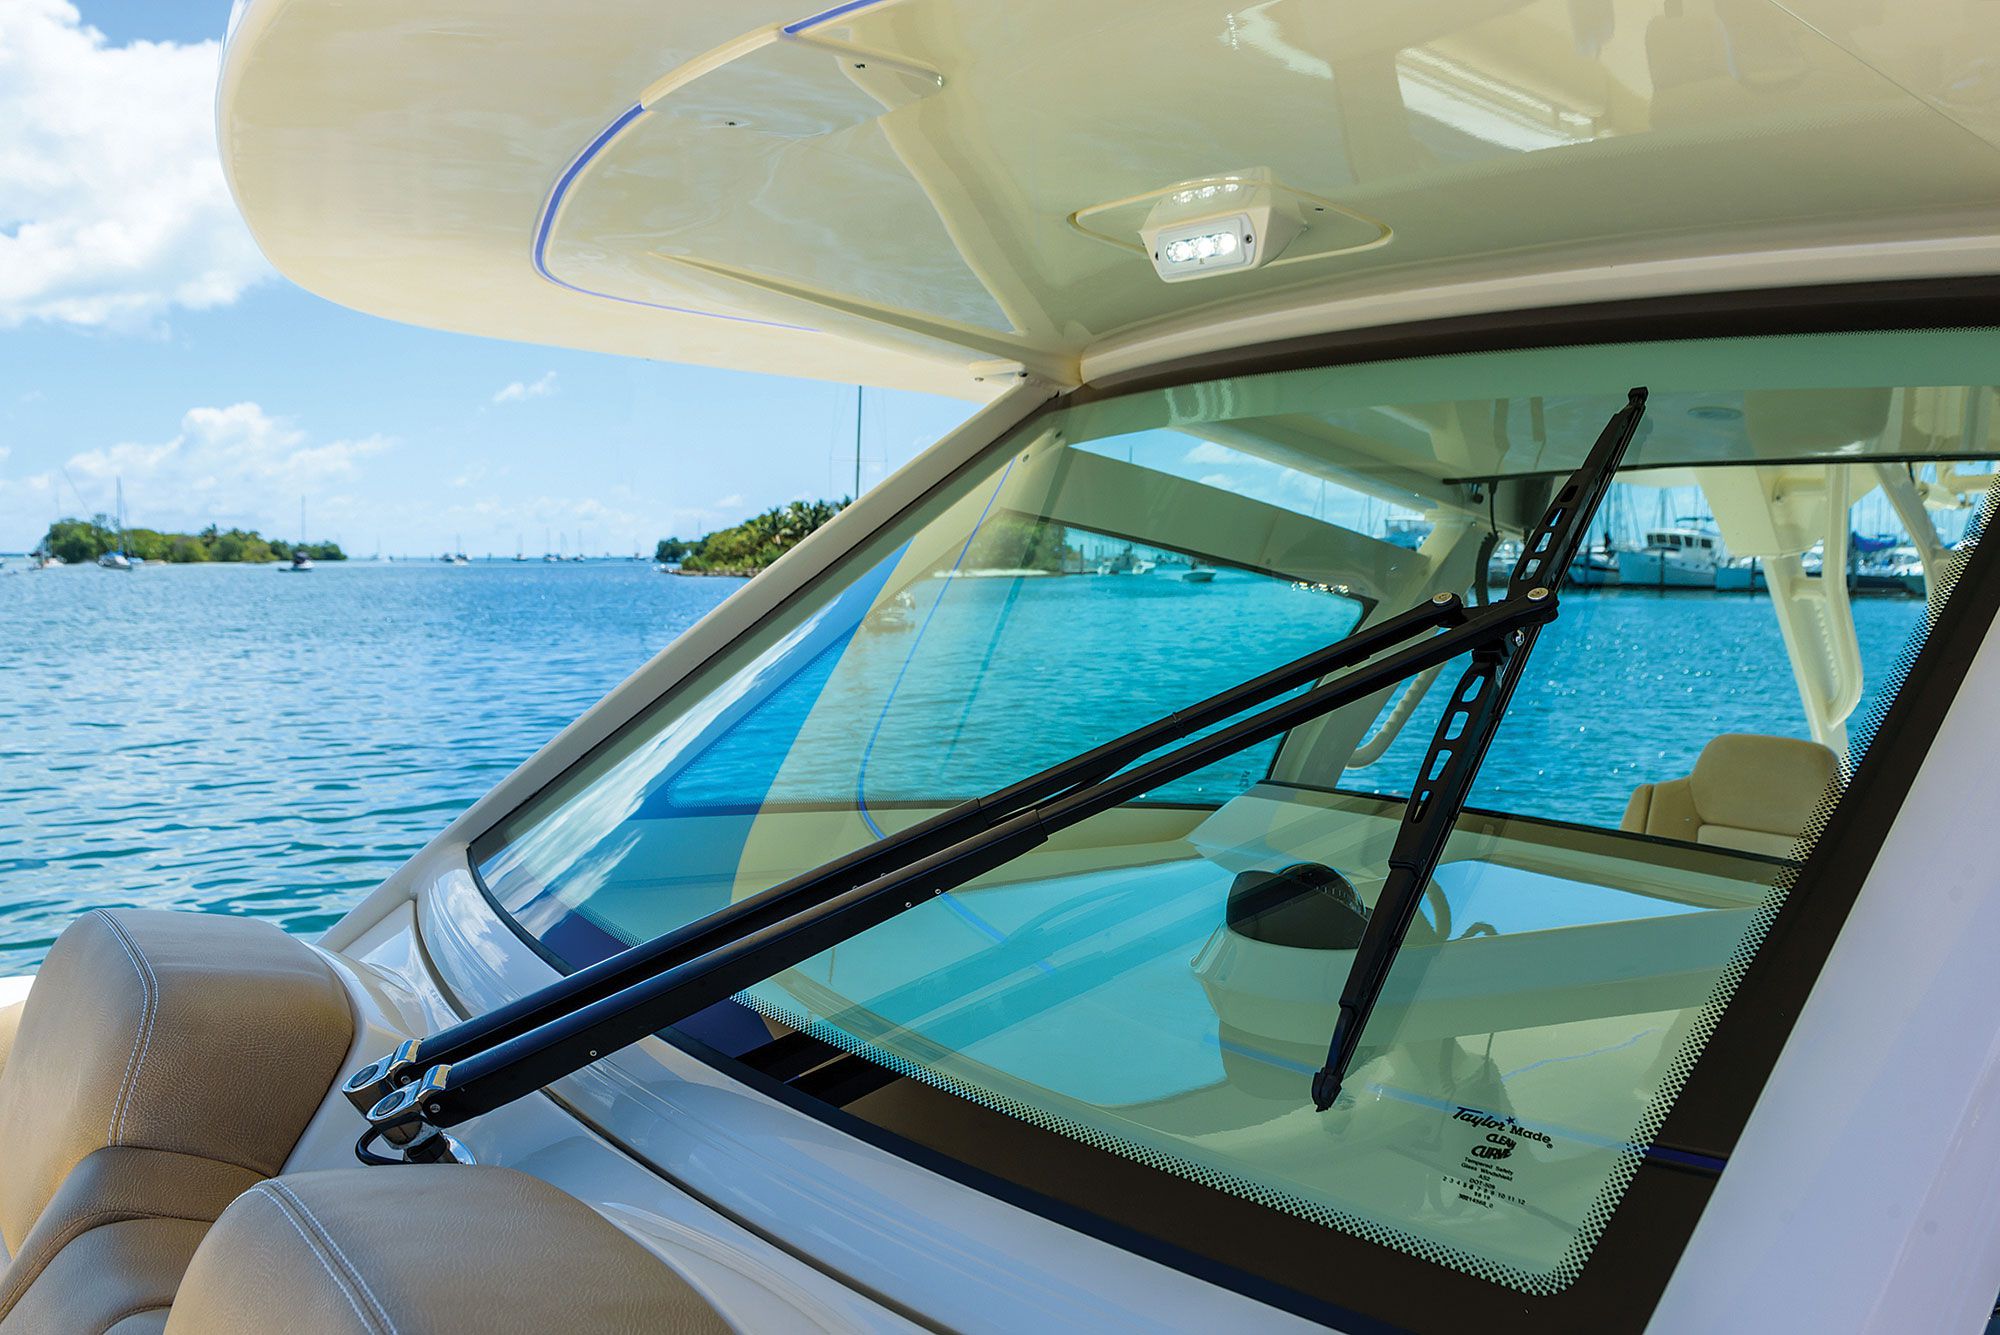 New Boat Windshields Offer Better Visibility And Style Sport Fishing Magazine